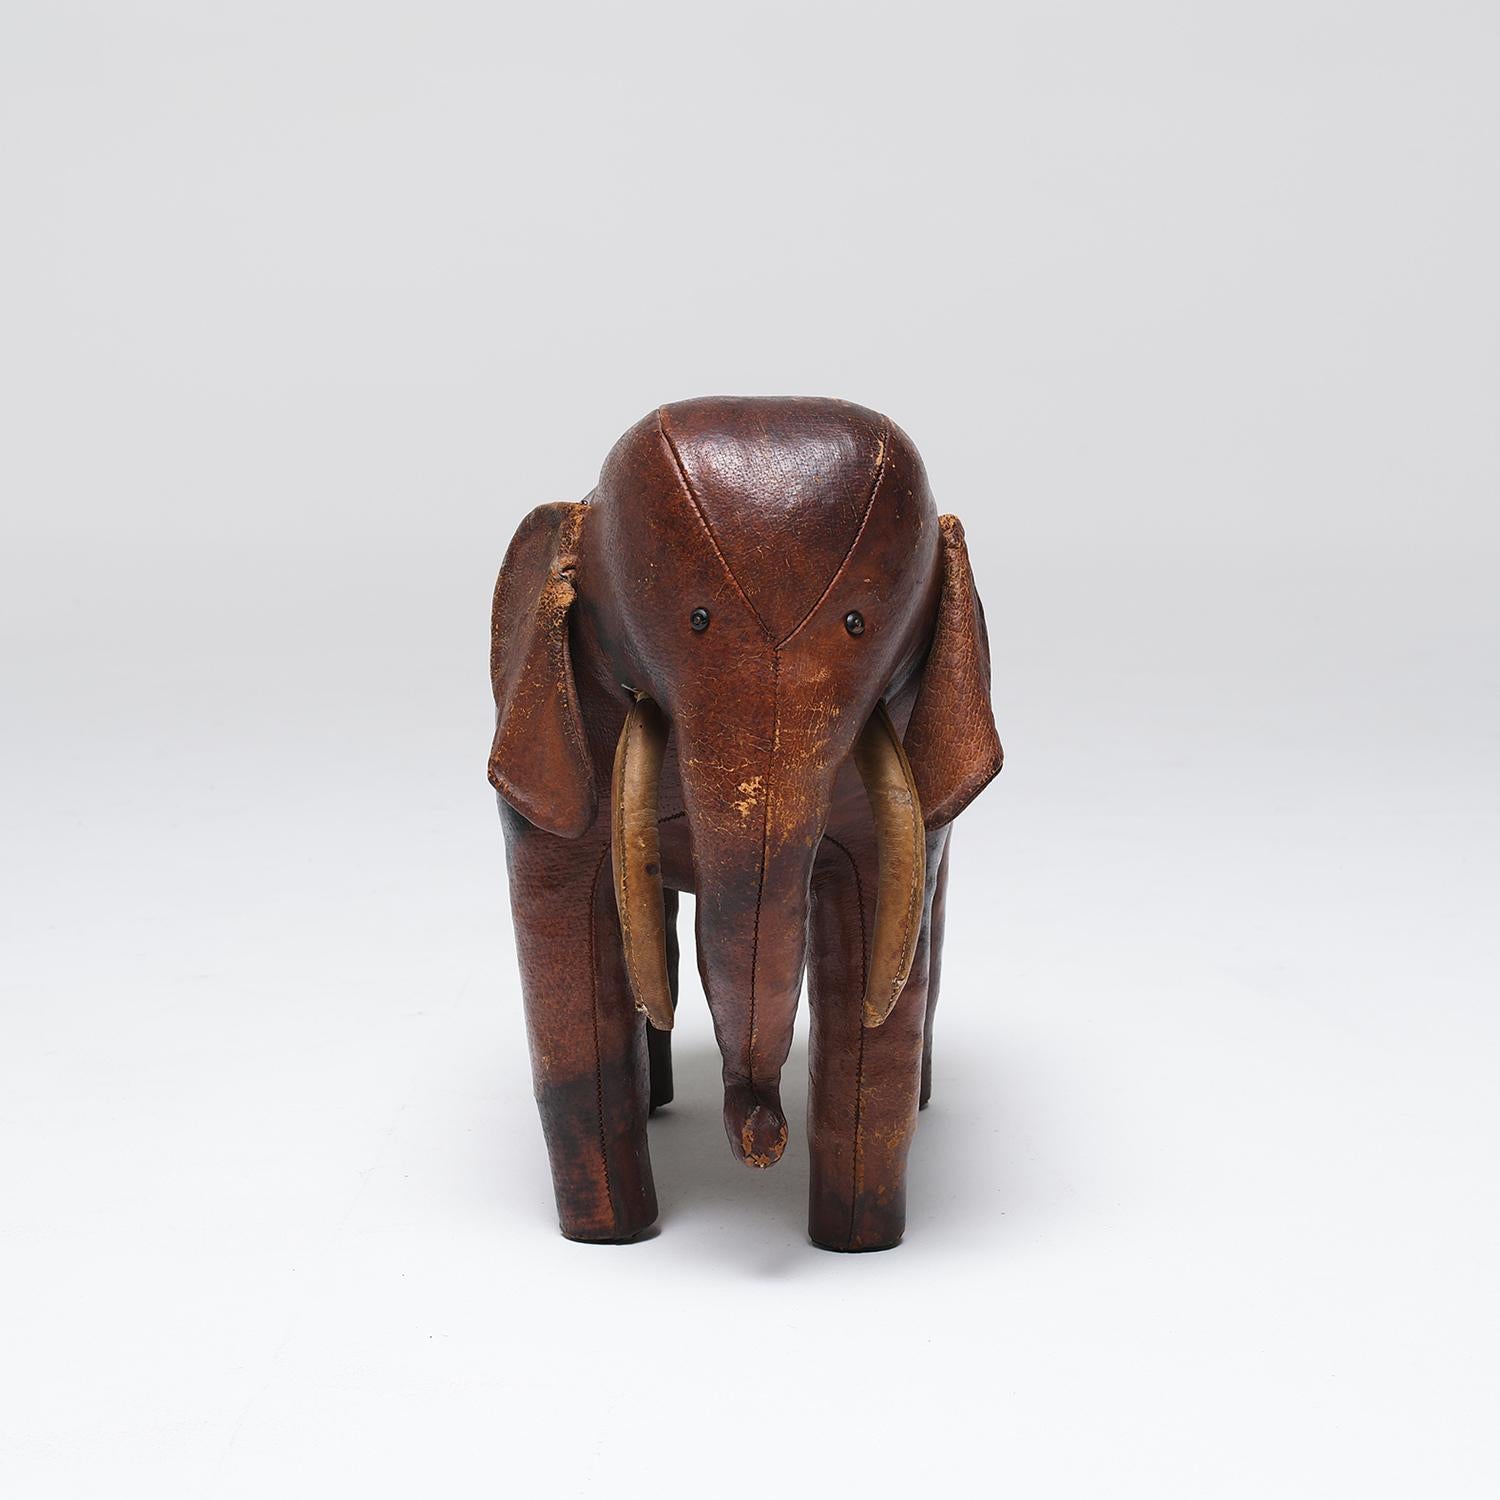 A vintage English leather elephant by Dimitri Omersa in good condition. The elephant is a wonderful example that boasts rich color and detailed construction, designed in the 1970's for Abercrombie and Fitch. Minor fading, due to age. Wear consistent